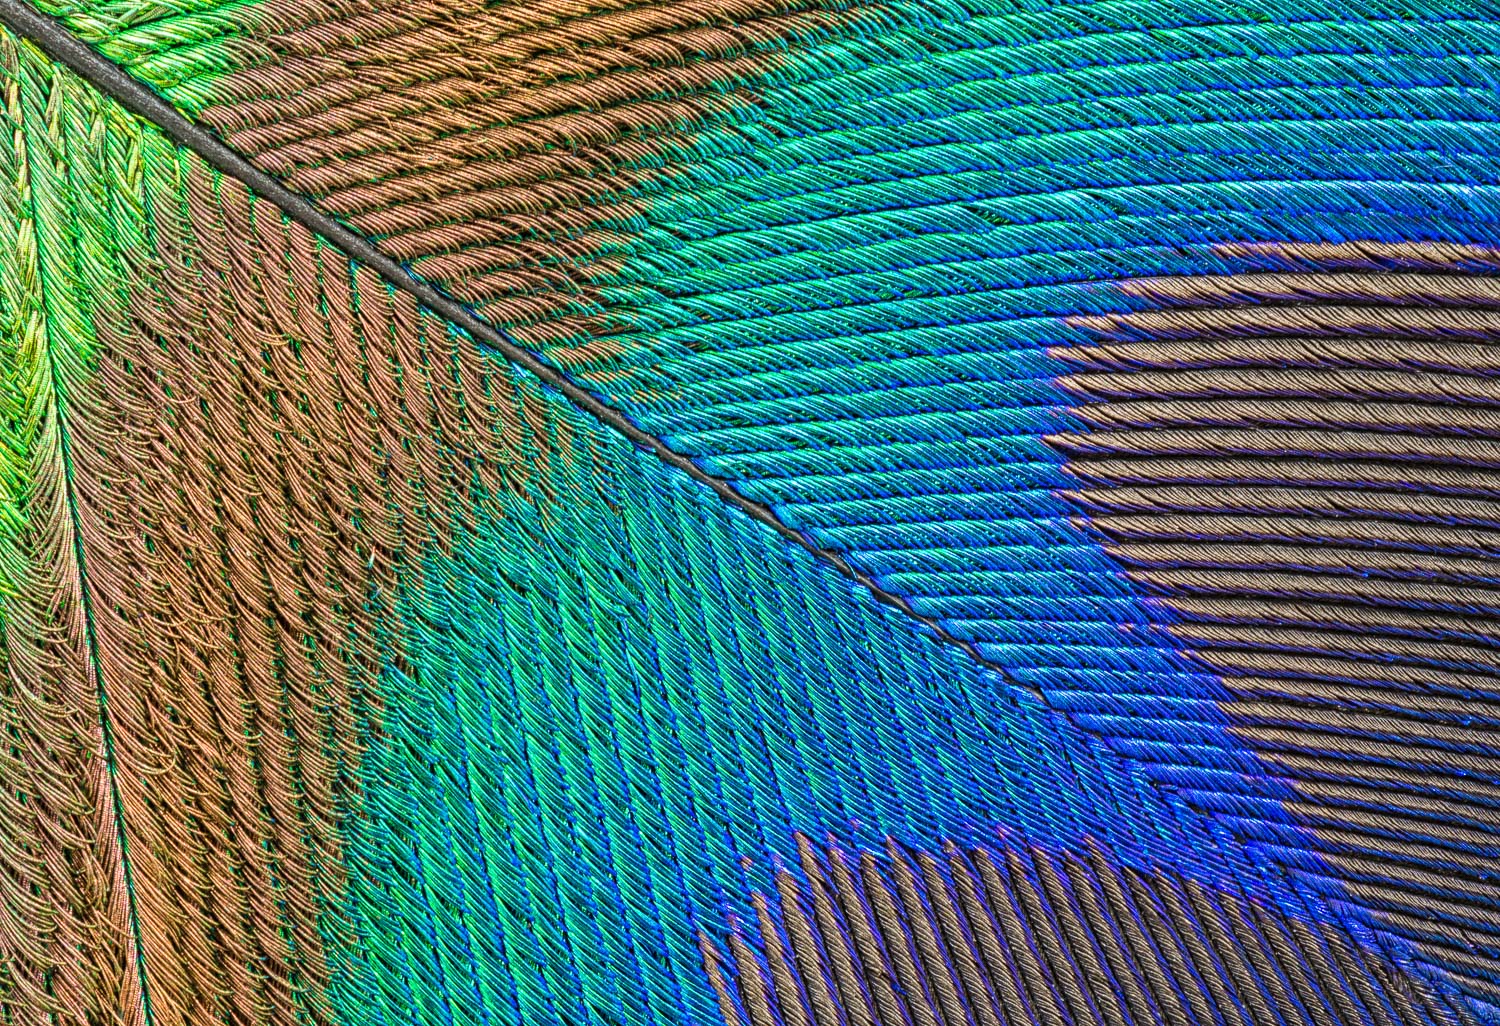 Macro photograph of a small colorful portion of a peacock tail feather. Image #3282